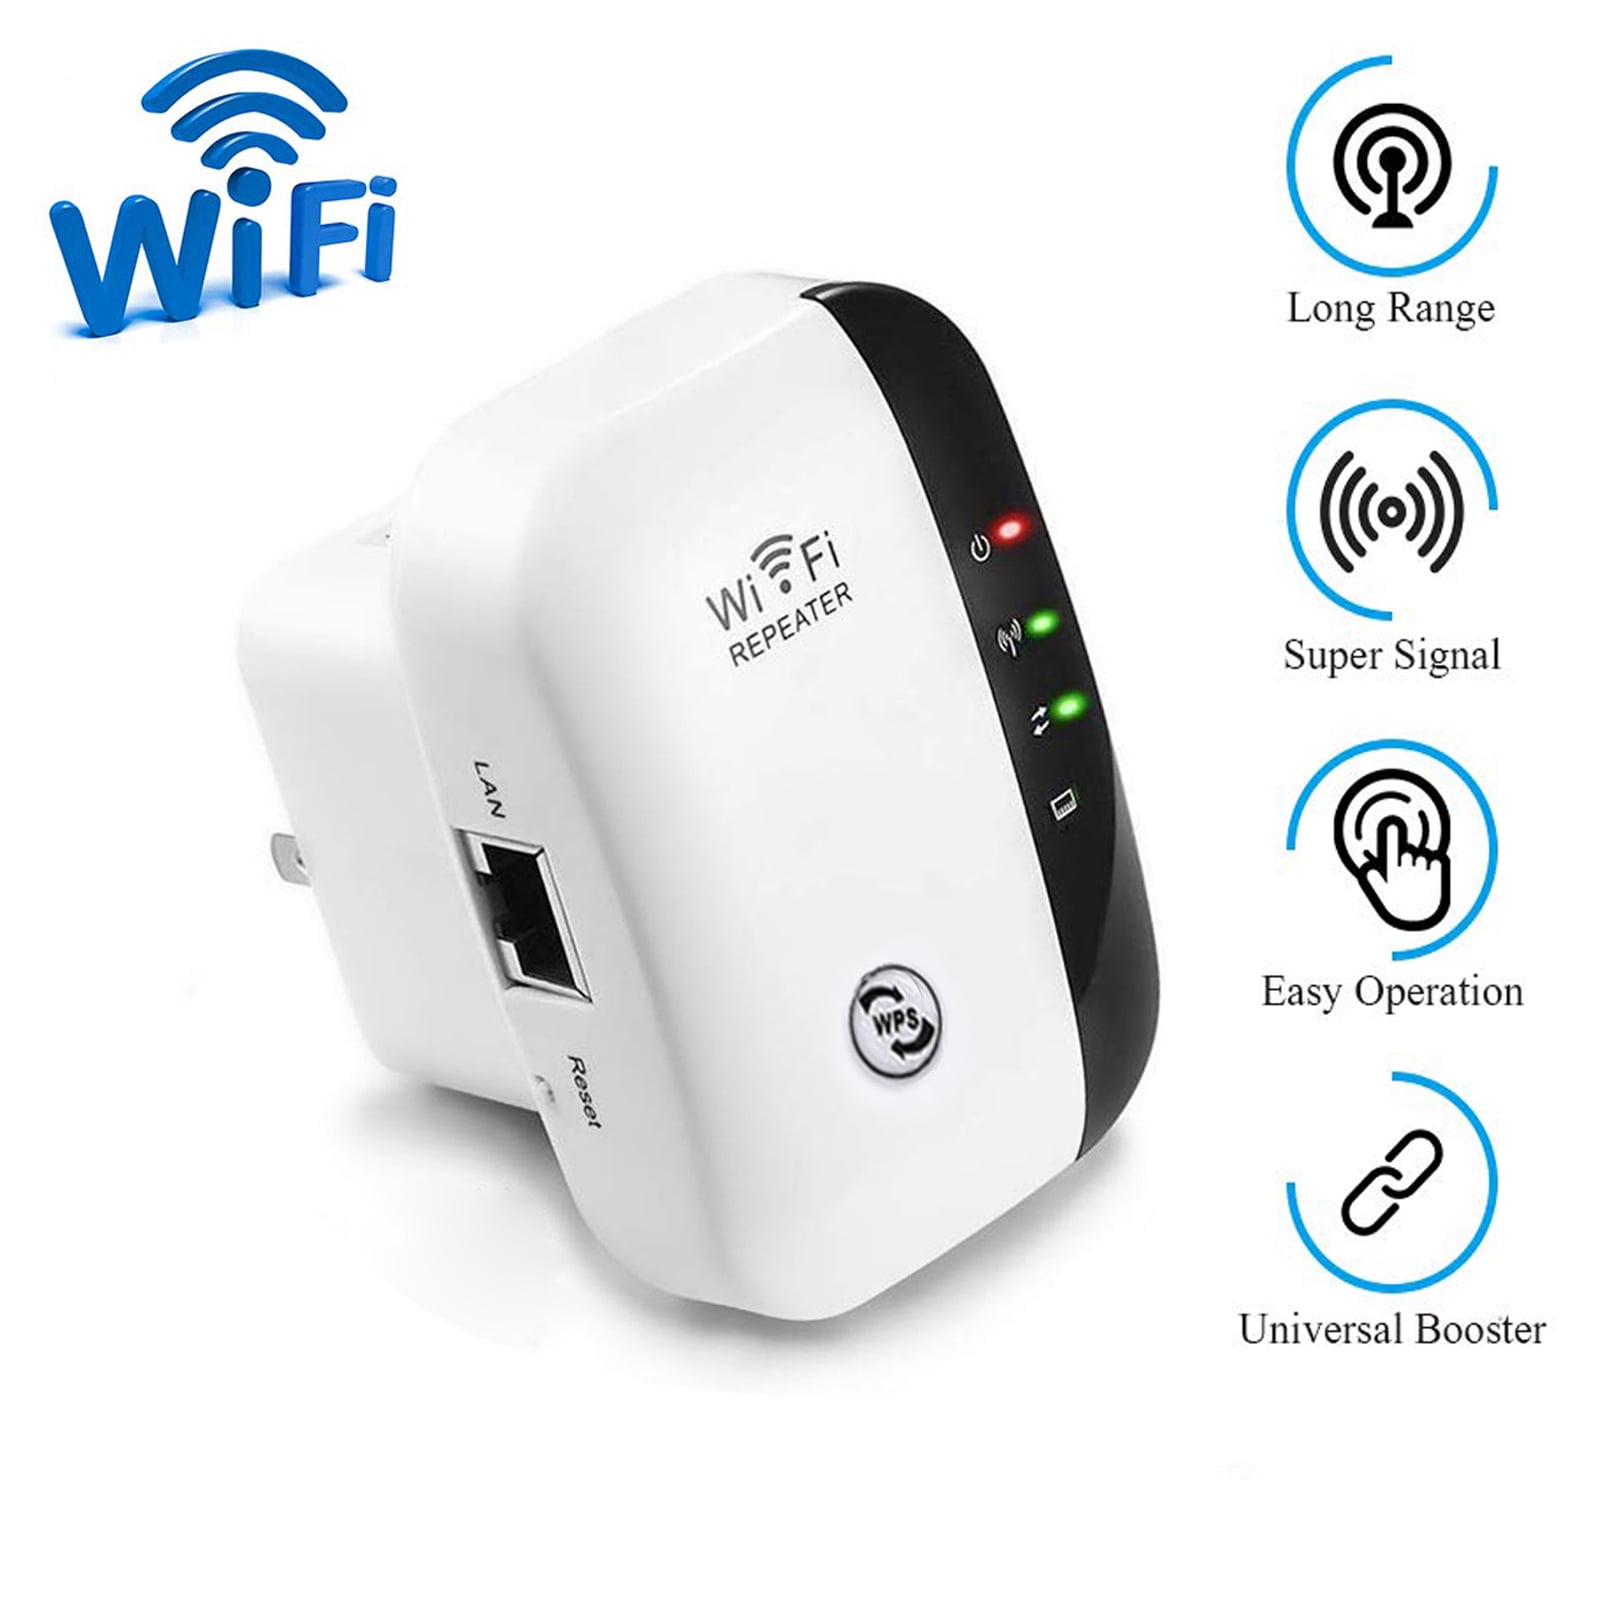 300Mbps WiFi Repeater Wireless Signal Range Extender Booster Amplifier LOT GFPX 